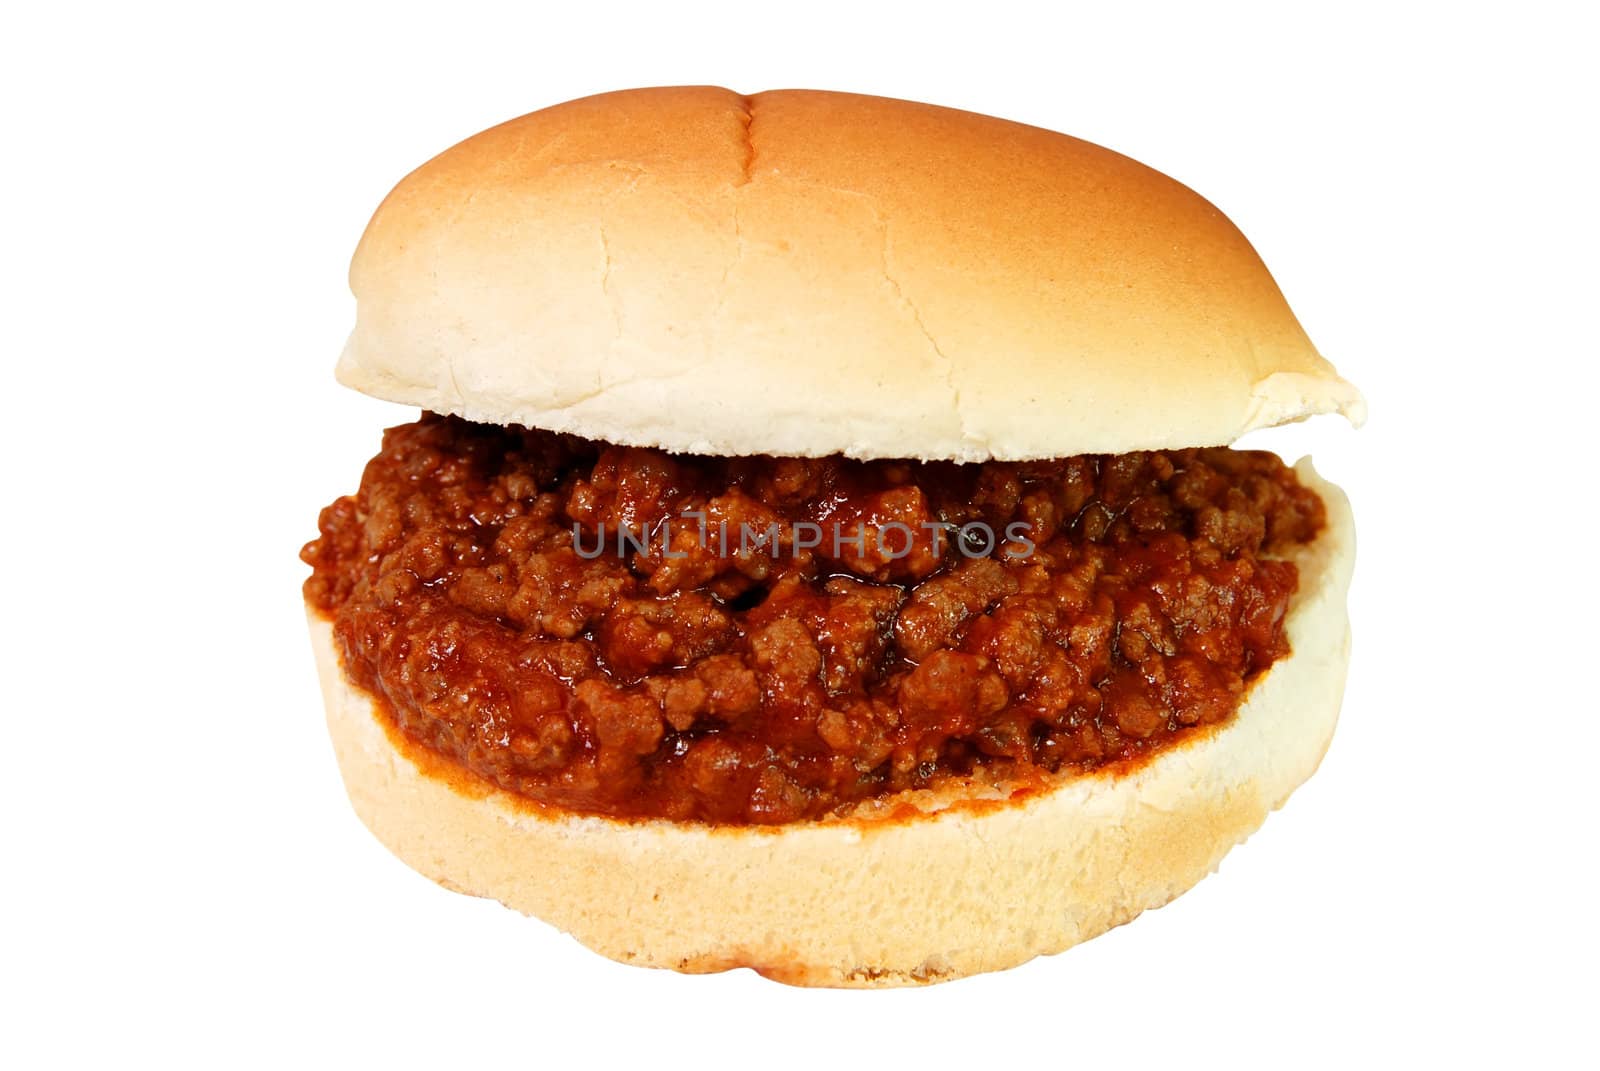 Sloppy joe burger isolated on white background with clipping path.